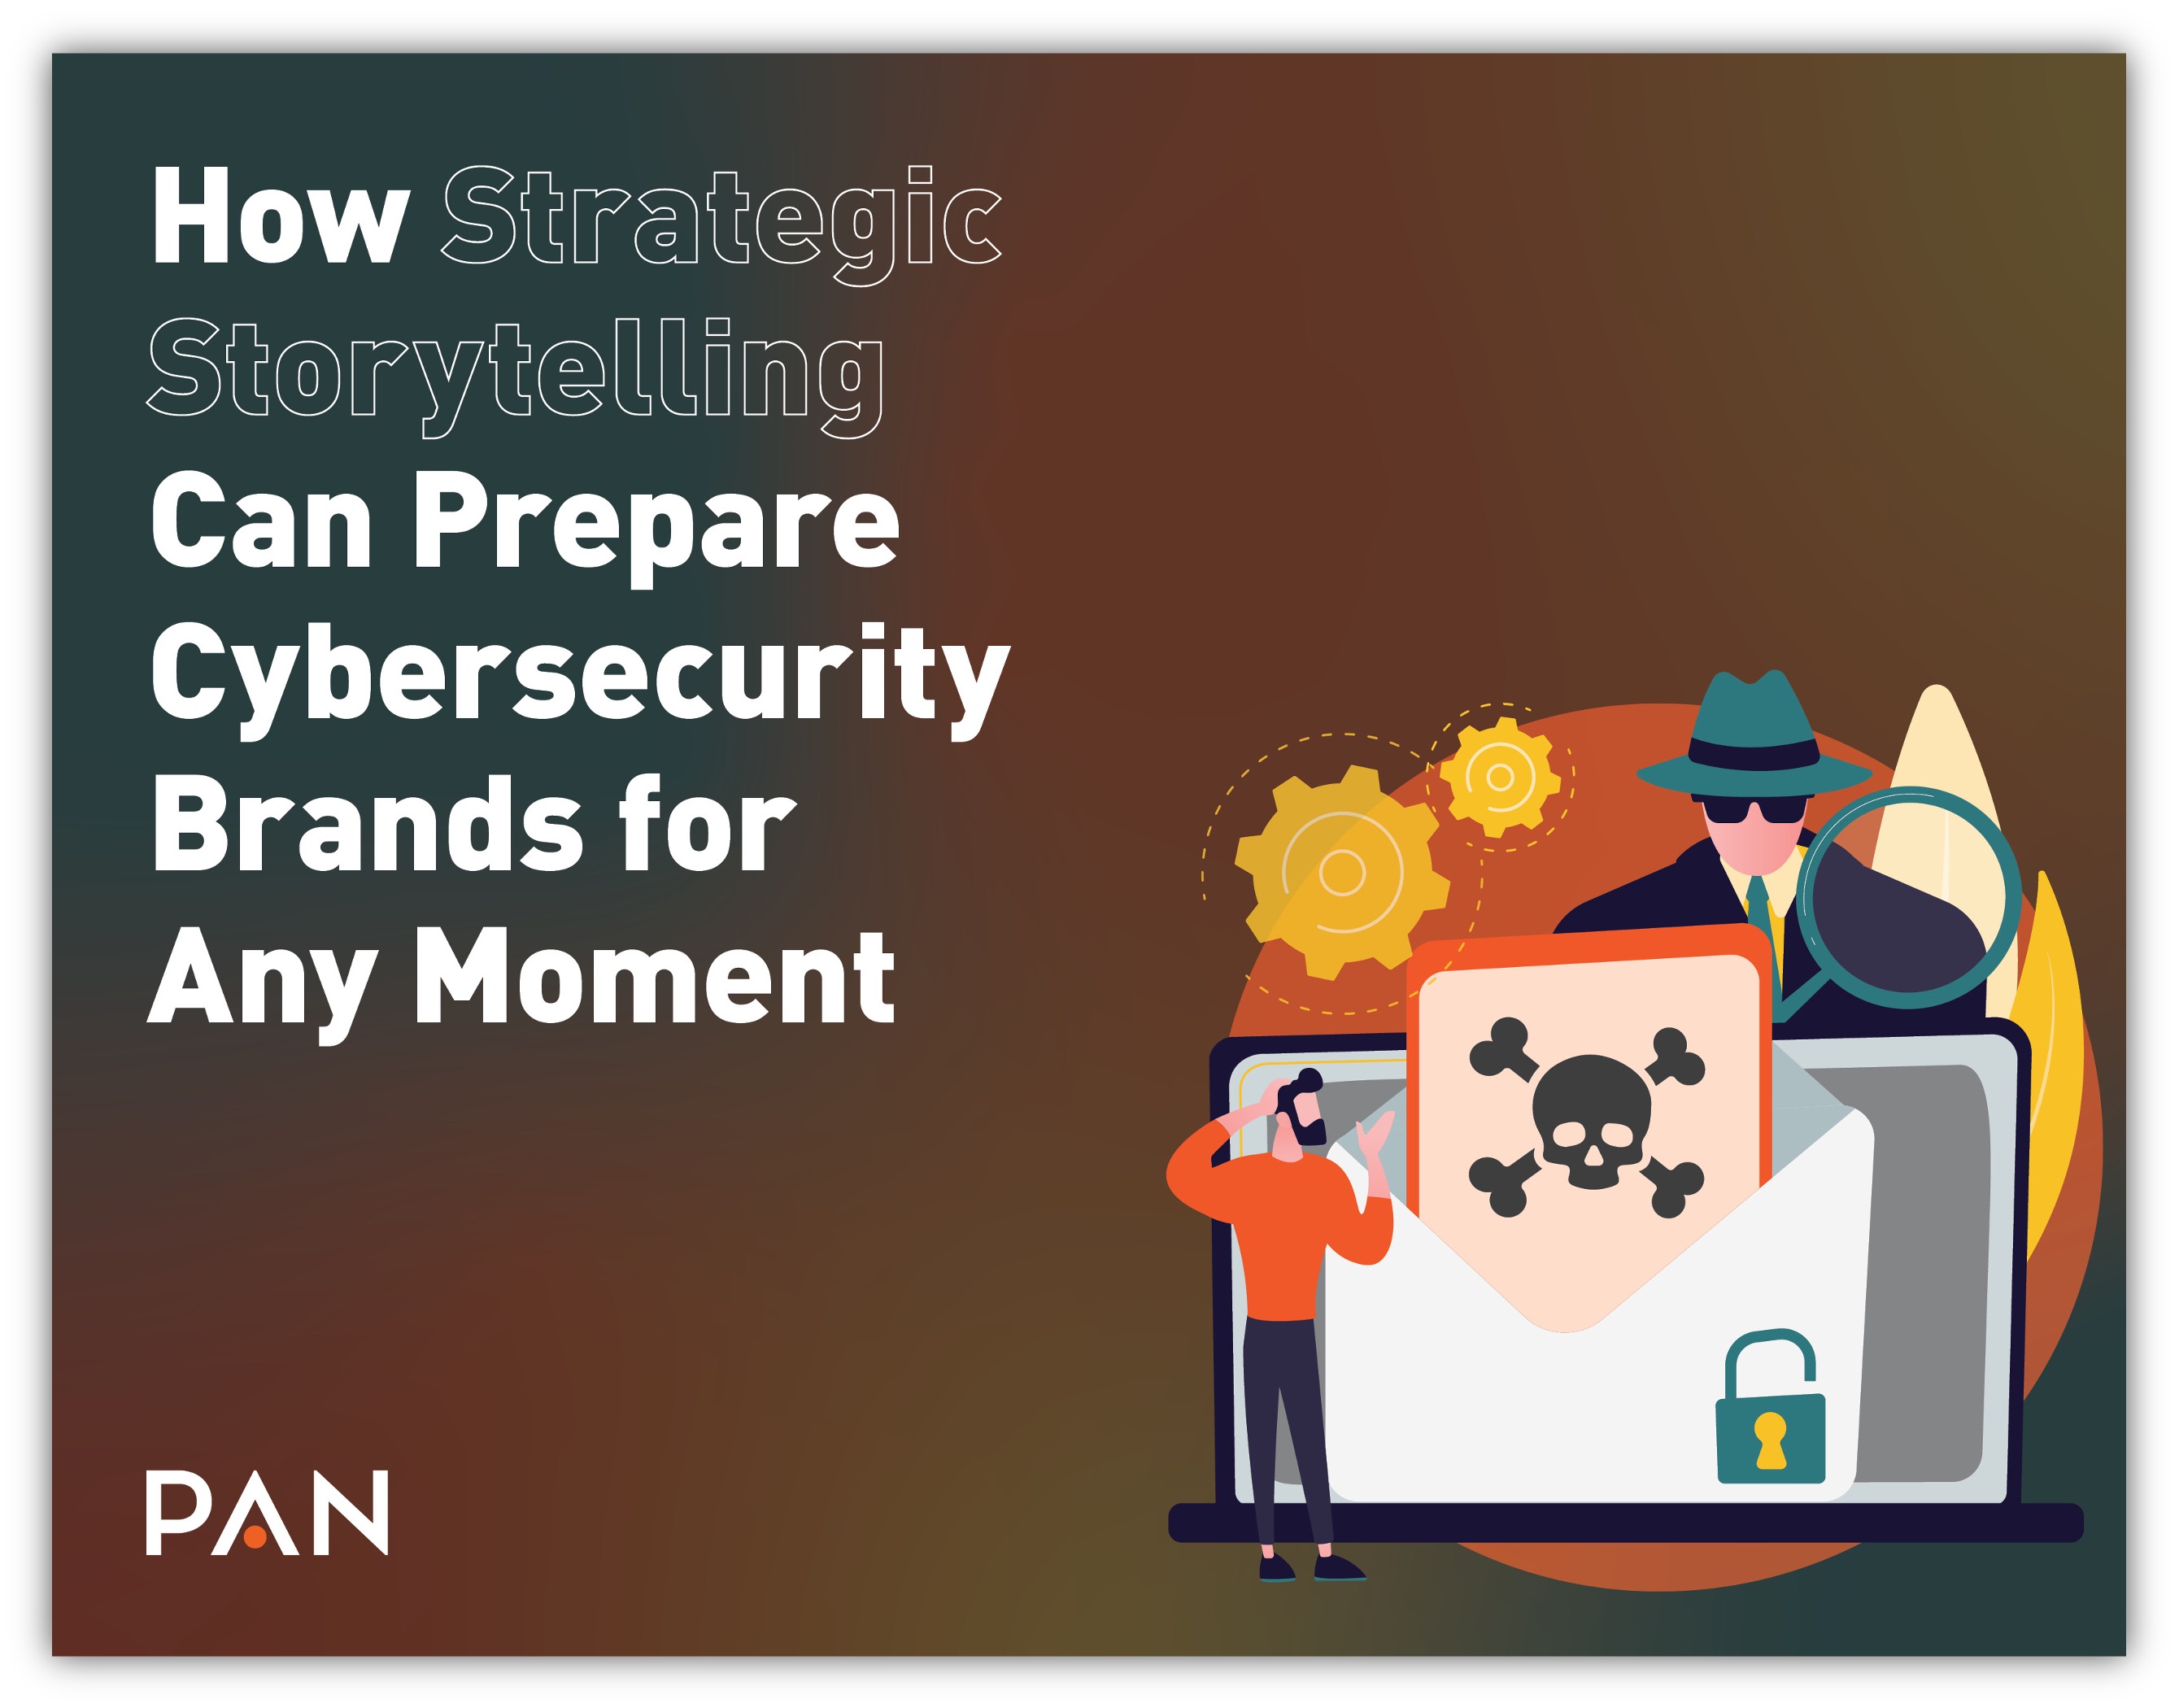 How Strategic Storytelling Can Prepare Cybersecurity Brands for Any Moment | PAN Communications